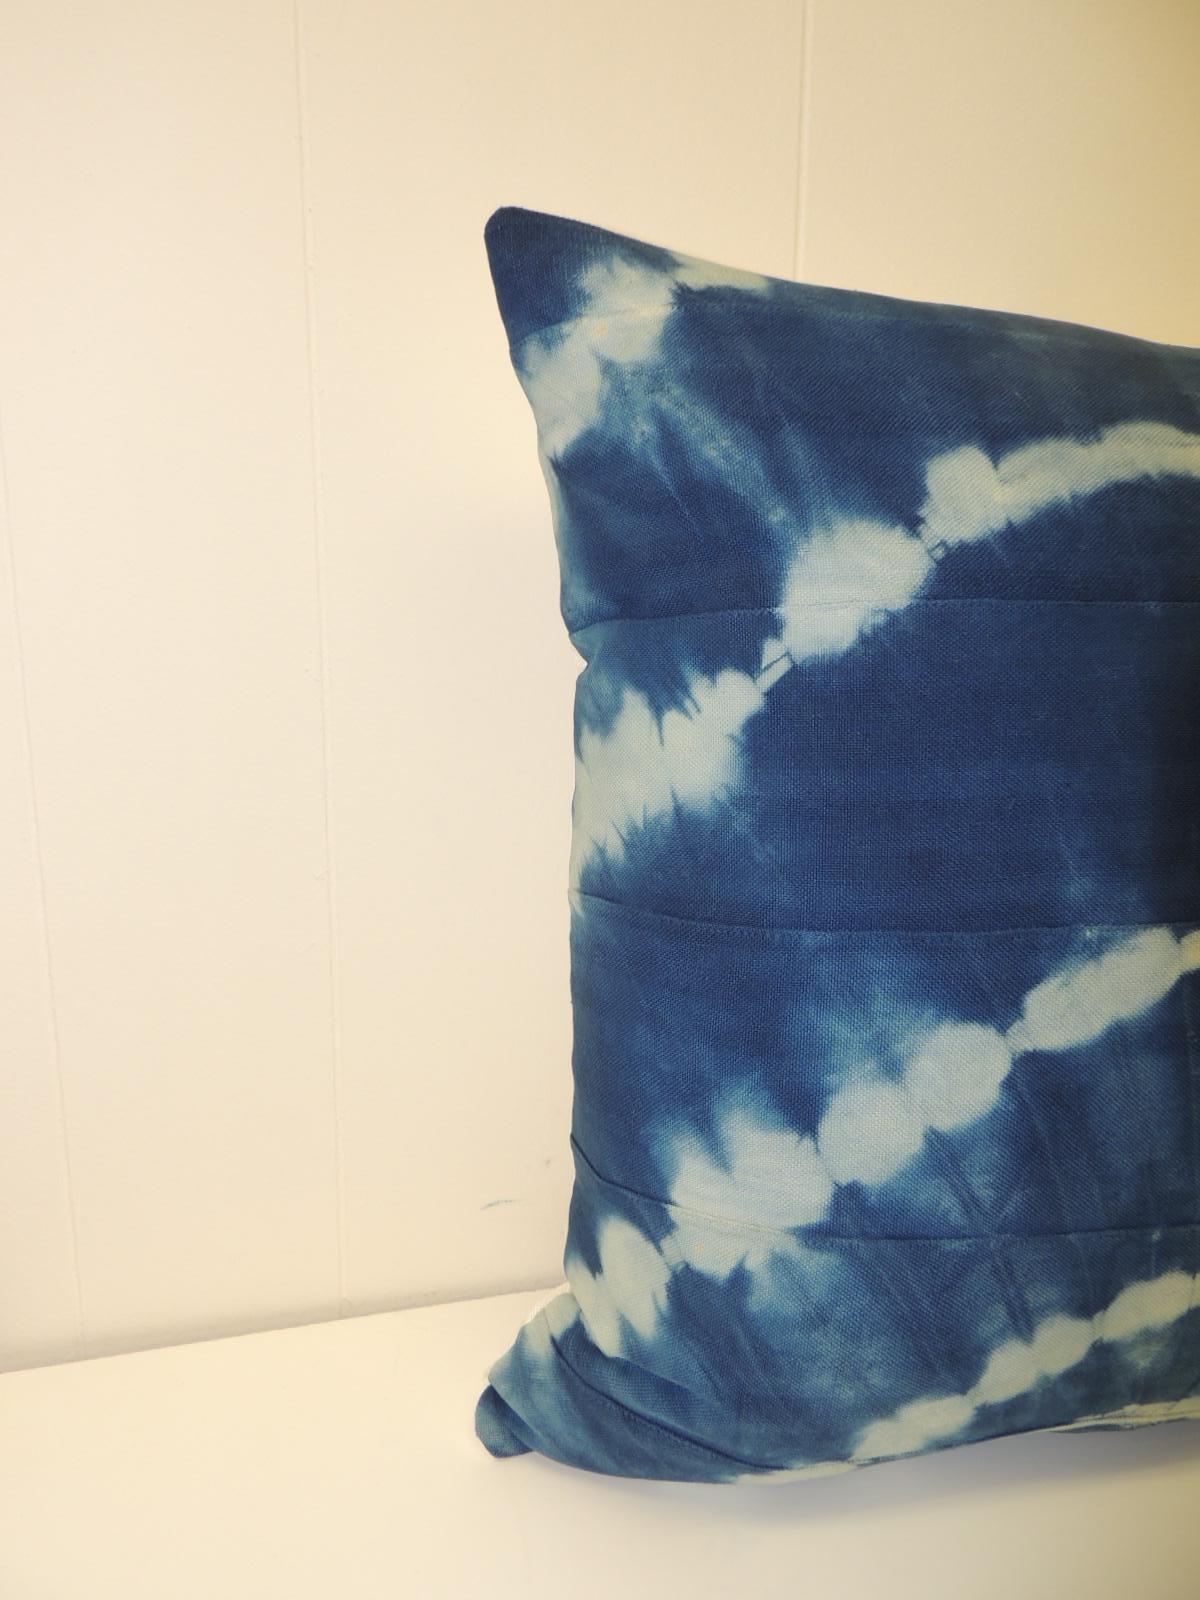 Vintage Indigo and White African Resist-dye Textile Decorative Pillow
Sunburst pattern square pillow with textured white silk backing.
Decorative pillow hand-made and designed in the USA. 
Closure by stitch (no zipper) with custom made feather/down